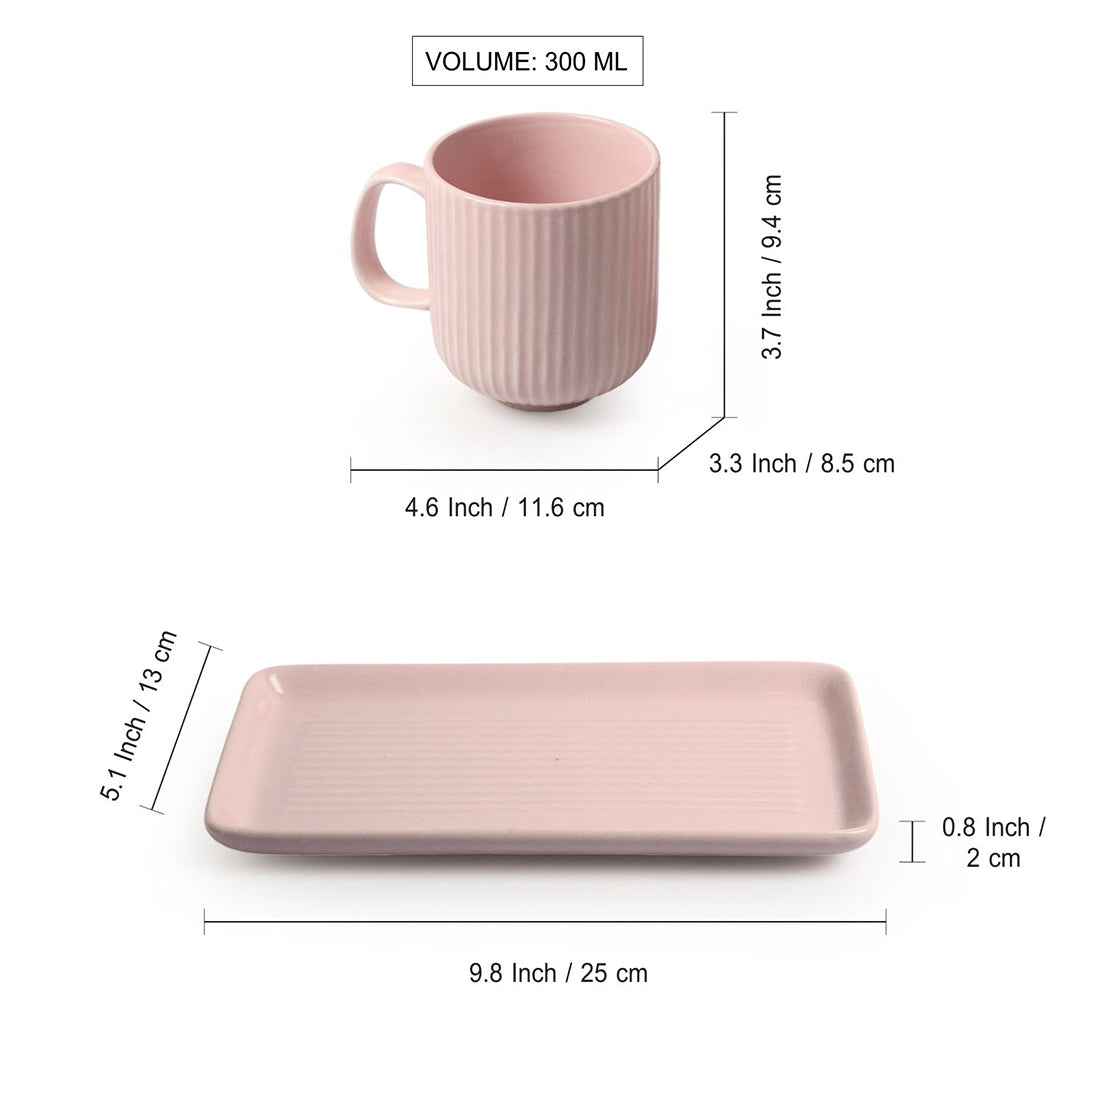 'Coral Reef' Glazed Studio Pottery Ceramic Tea & Coffee Mugs with Tray (Set of 2, 300 ml, Pink)